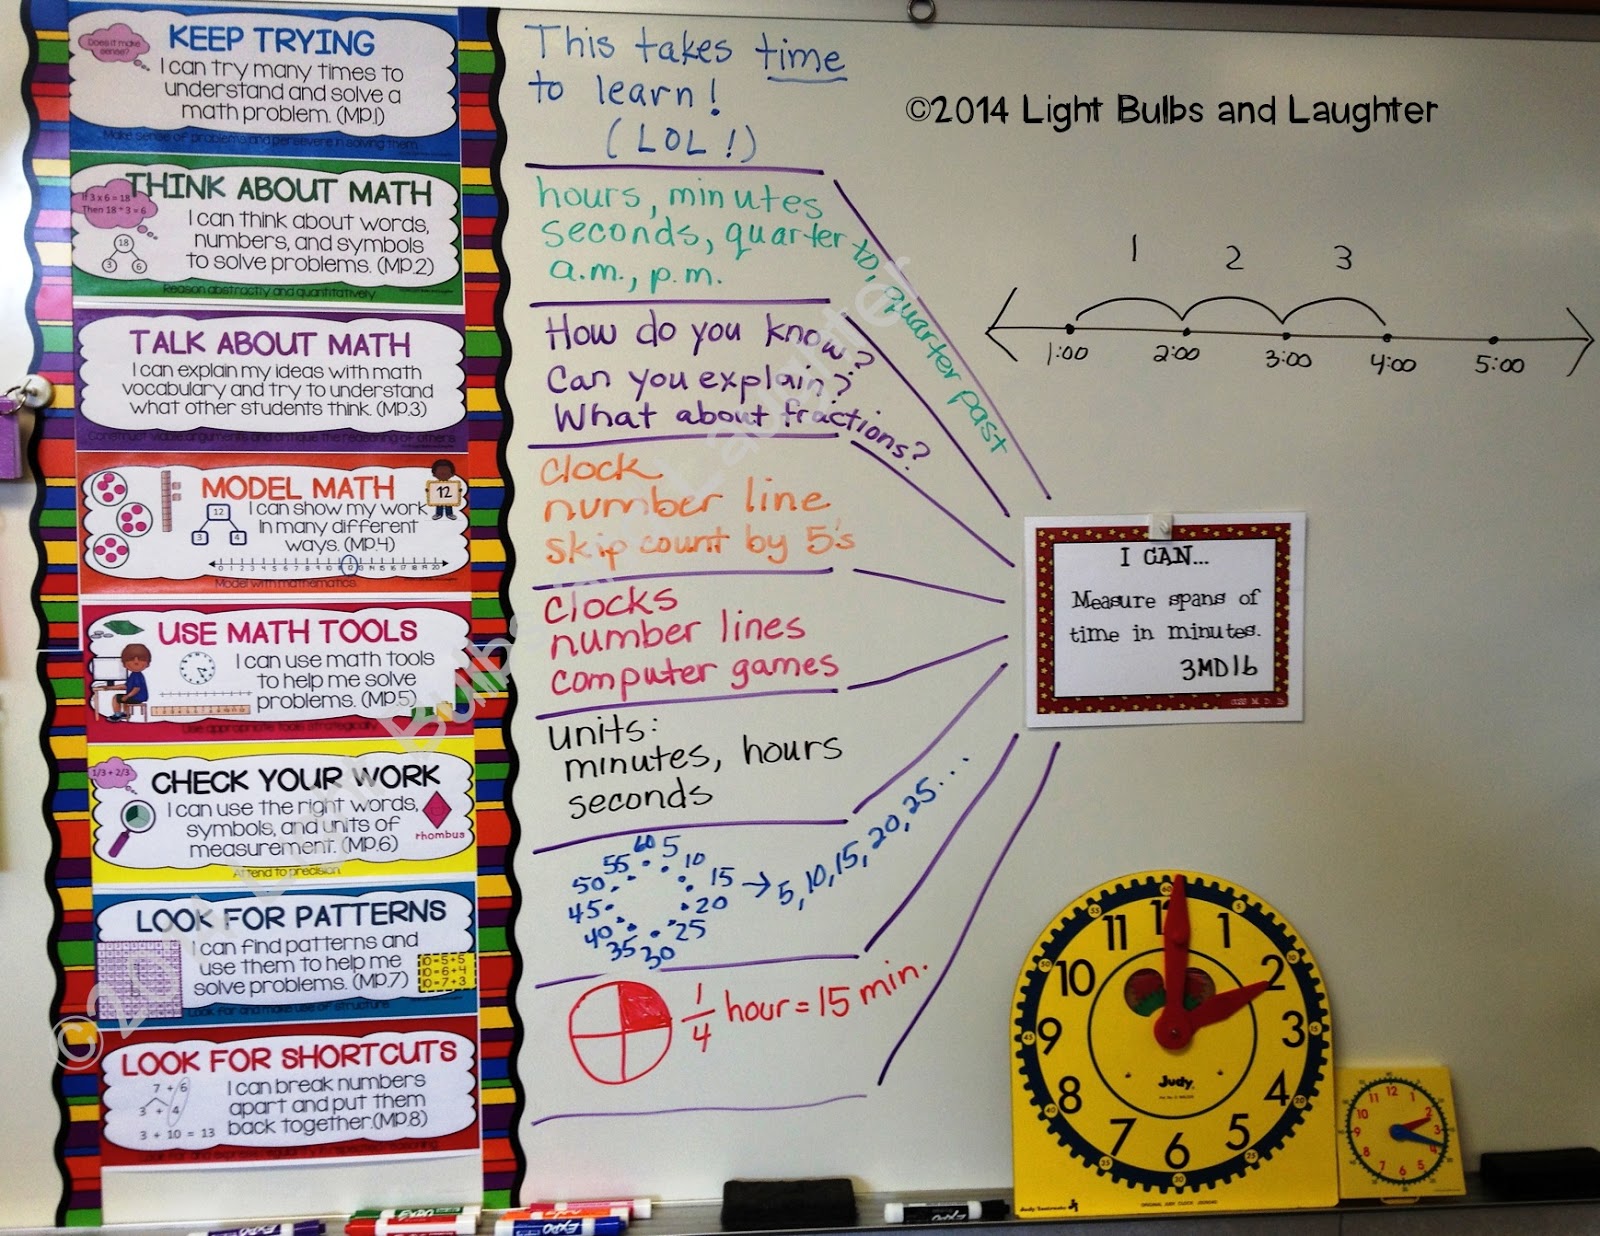 Light Bulbs and Laughter - Eight Standards for Mathematical Practice, Part 1